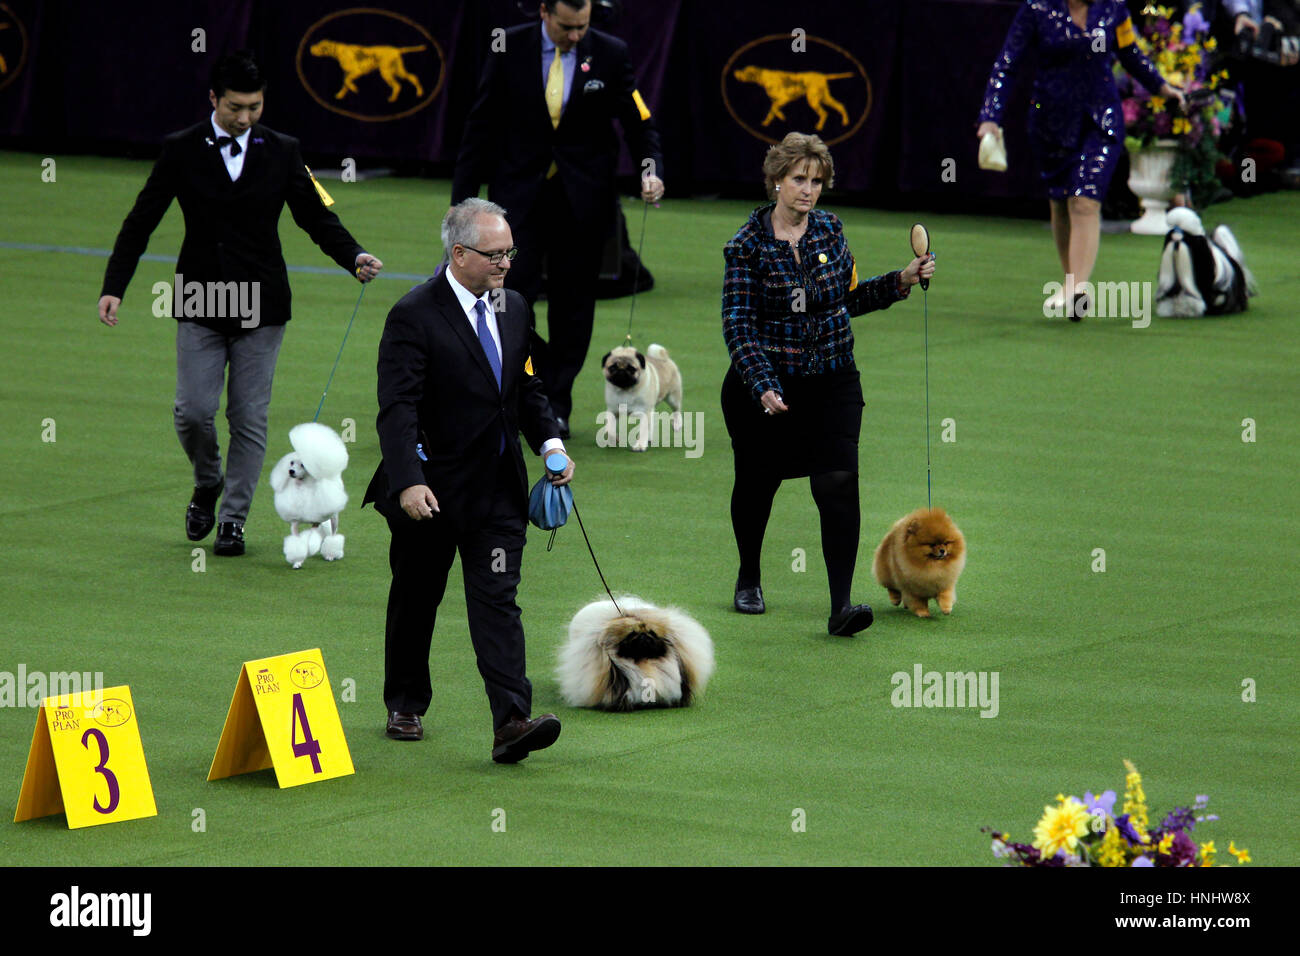 Competitors in the Toy Division enter the ring at the 141st Annual Westminster Dog Show at Madison Square Garden in New York City.  In the foreground is, 'Chuckie' a Pekingese who won the division.  Other breeds pictured are Pomeranian, Toy Poodle, Pug and Shih Tsu Stock Photo